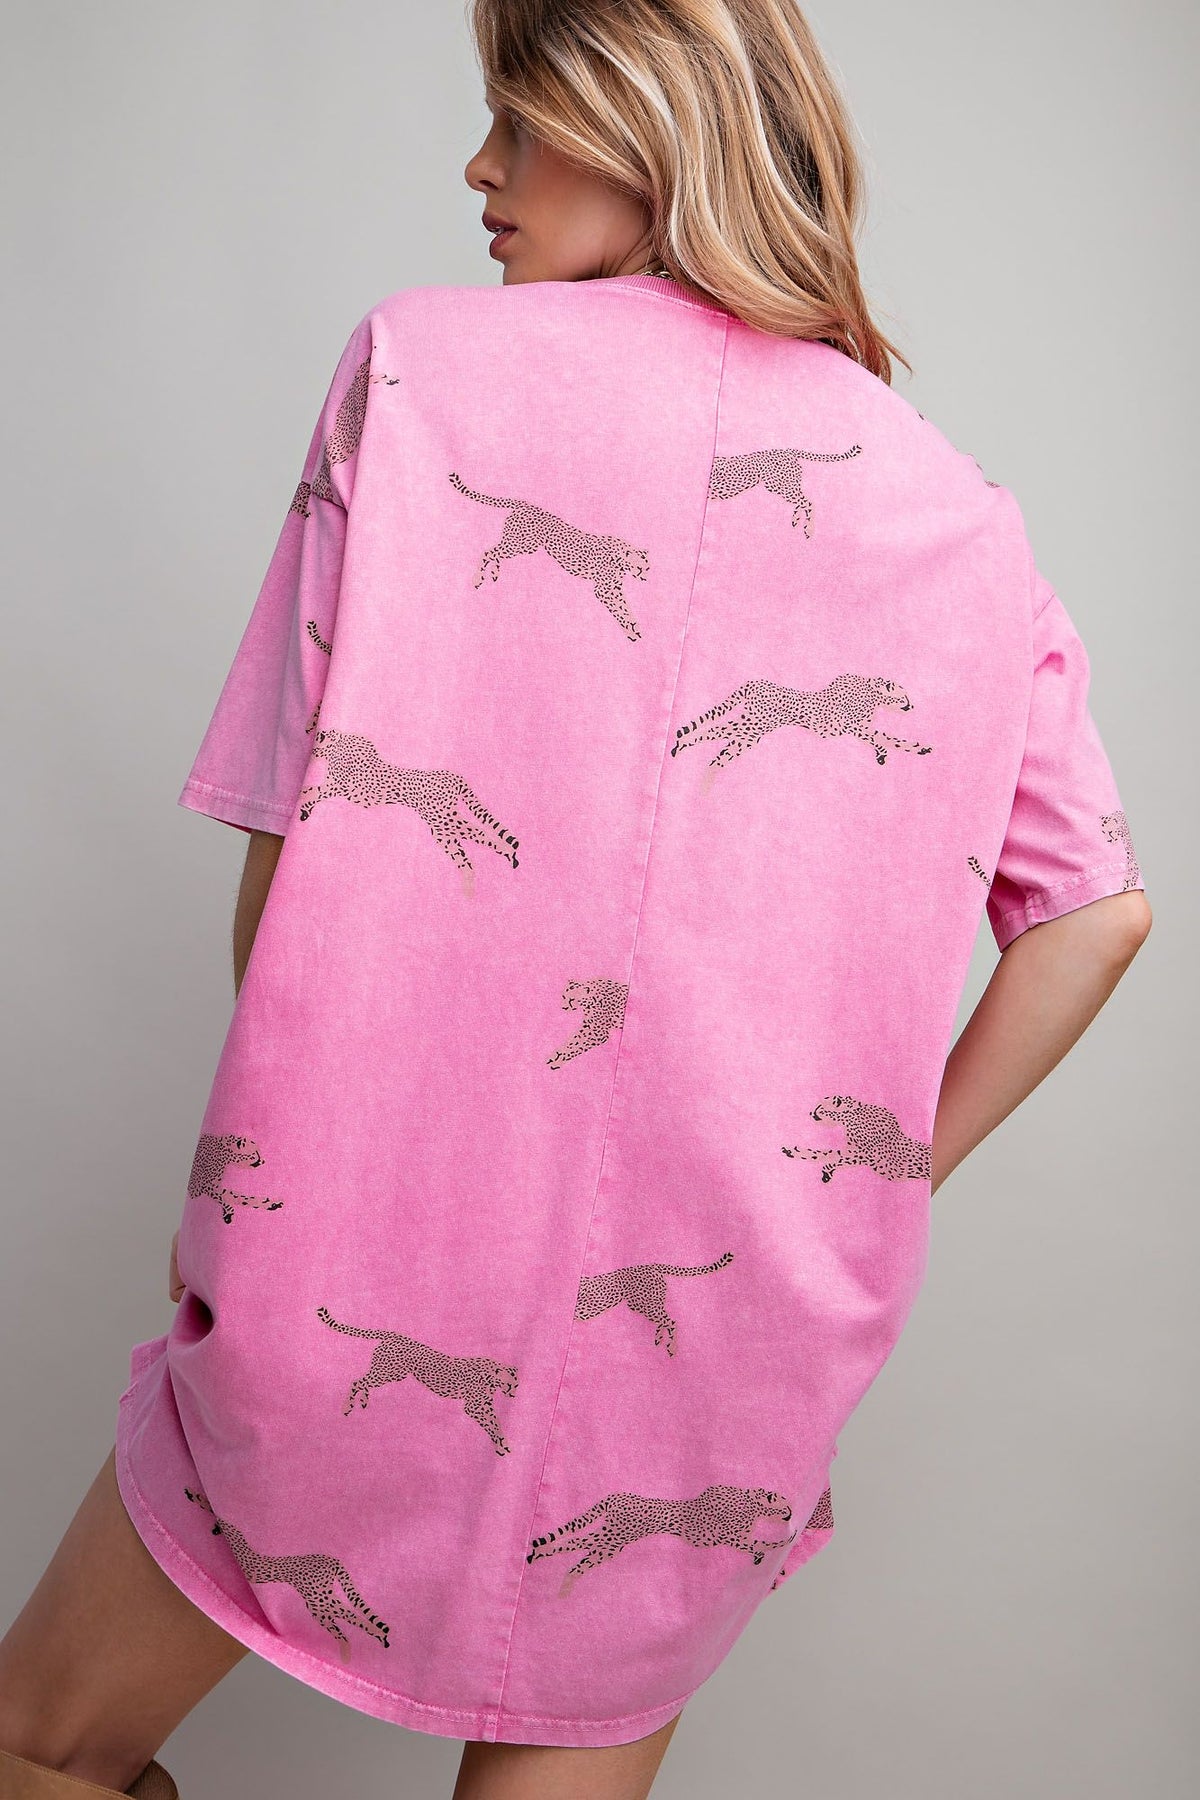 Pink Cheetah Dress by Easel